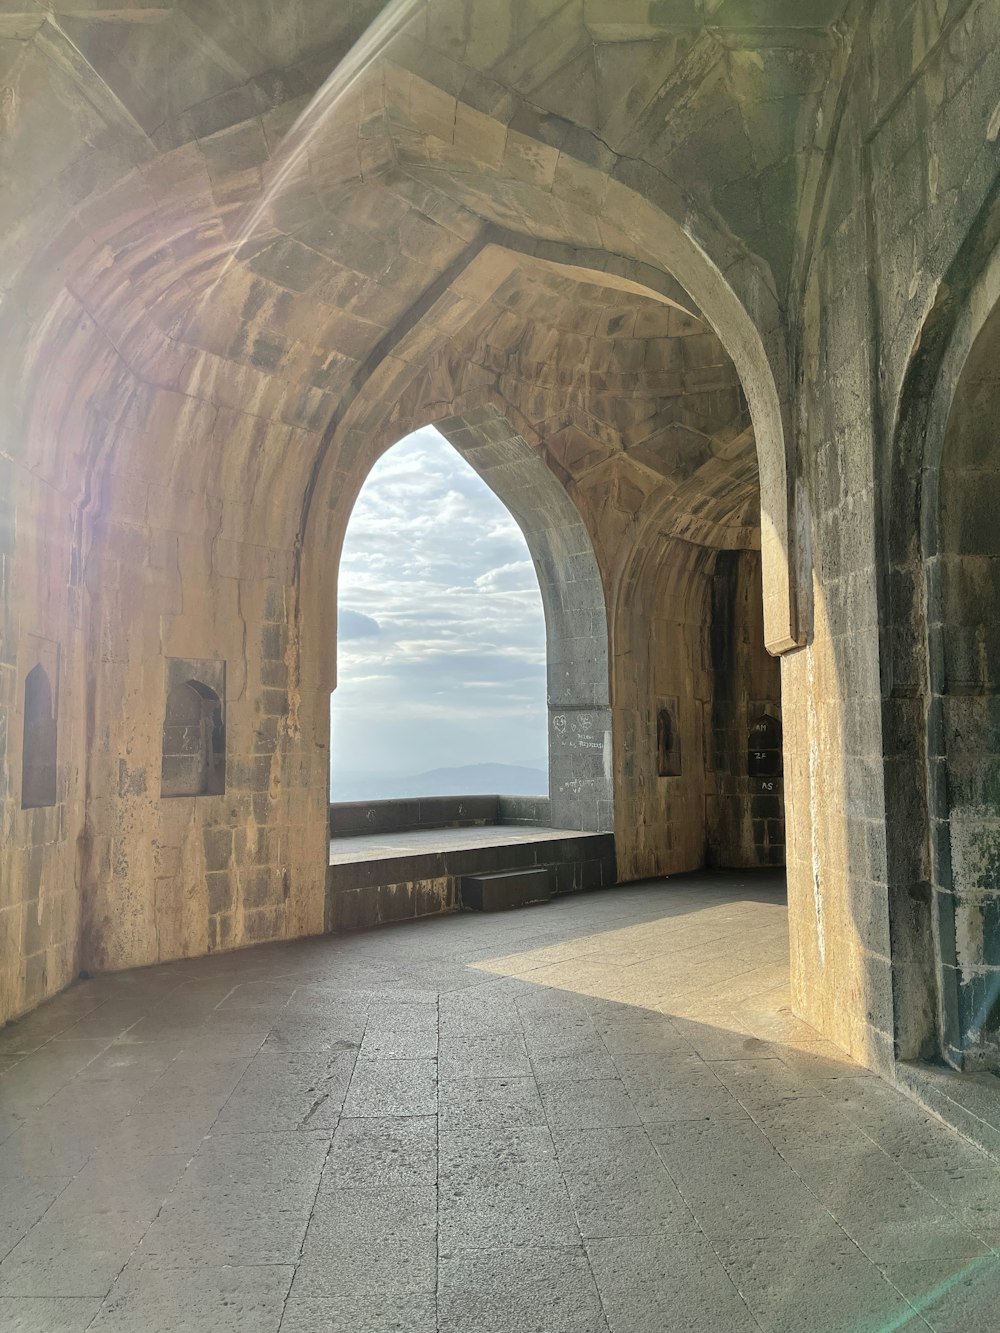 a stone archway with a view of a body of water